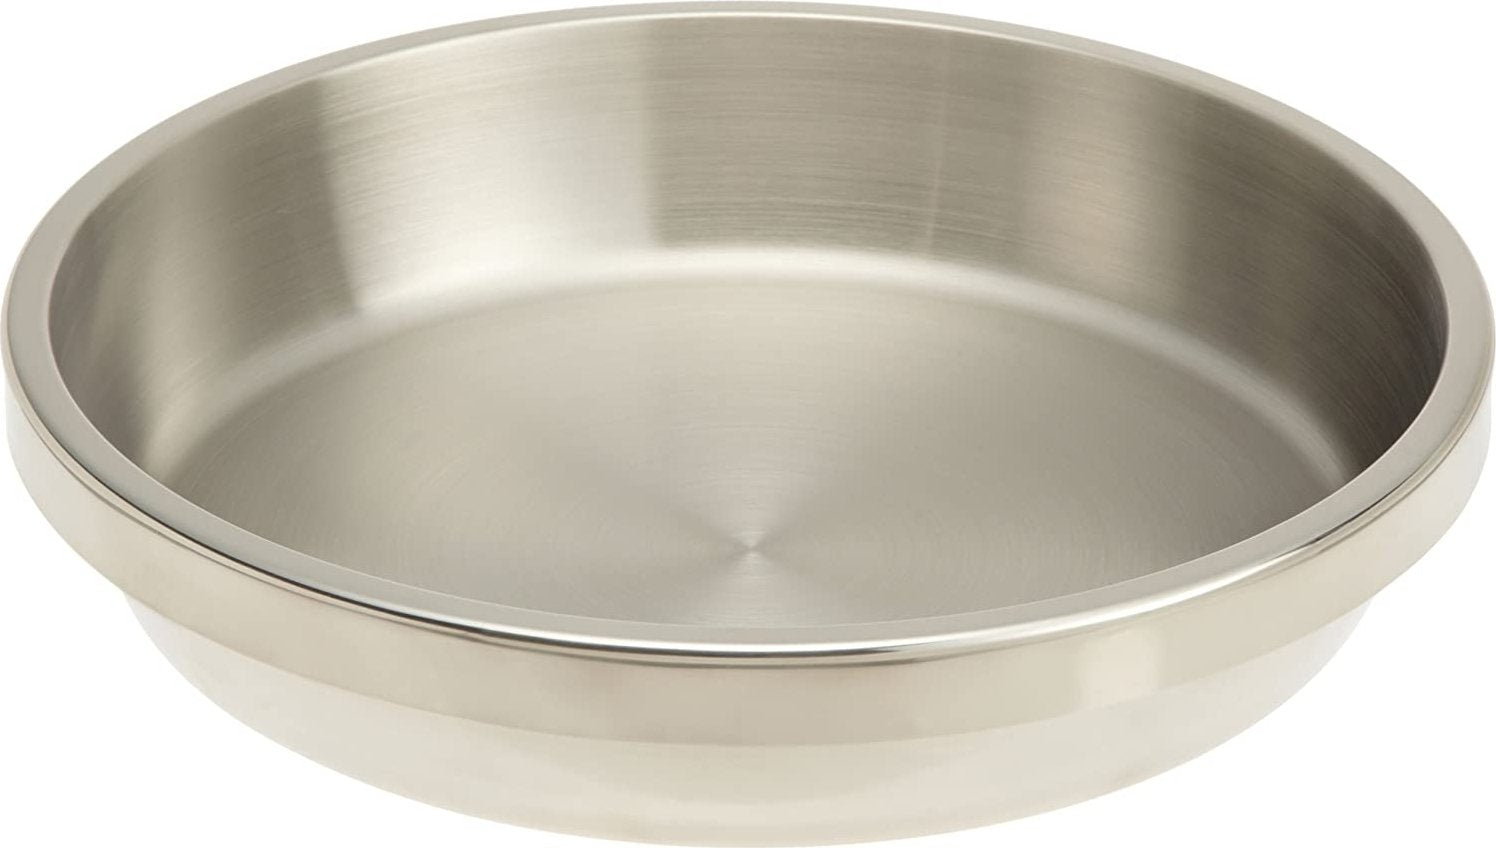 Browne - Octave Round Chafer Water Pan - 5751712